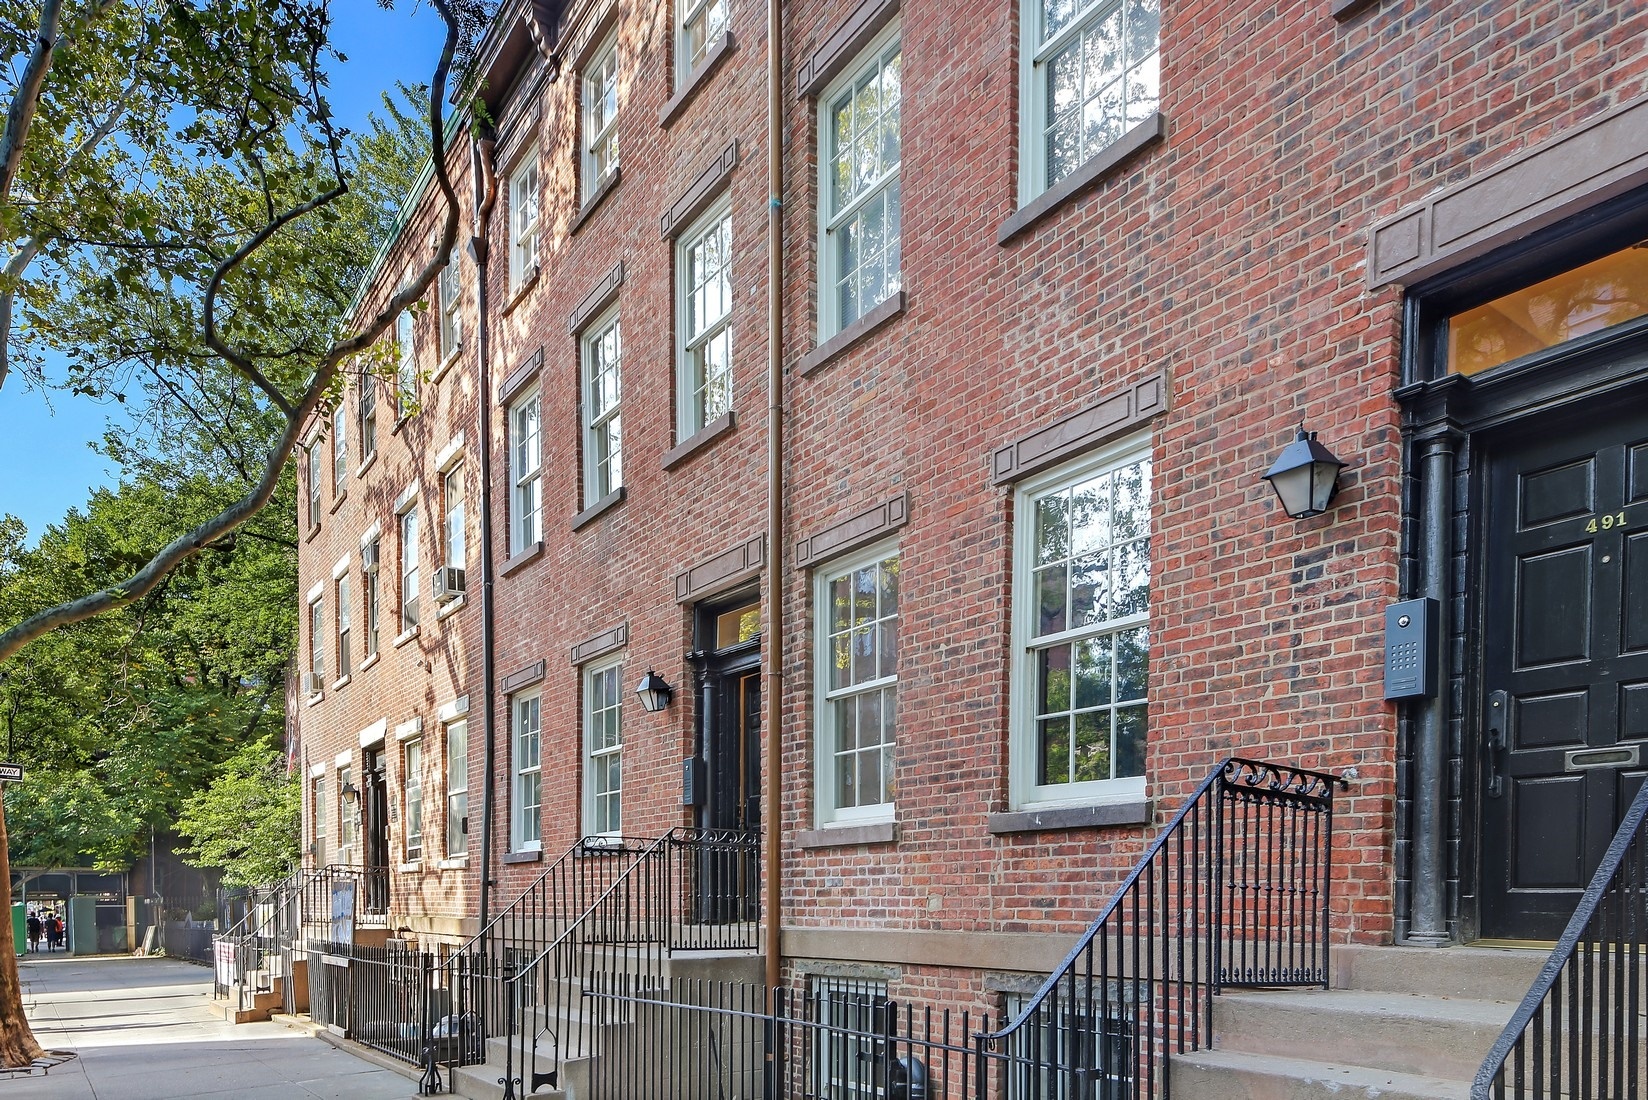 The Townhomes on Hudson